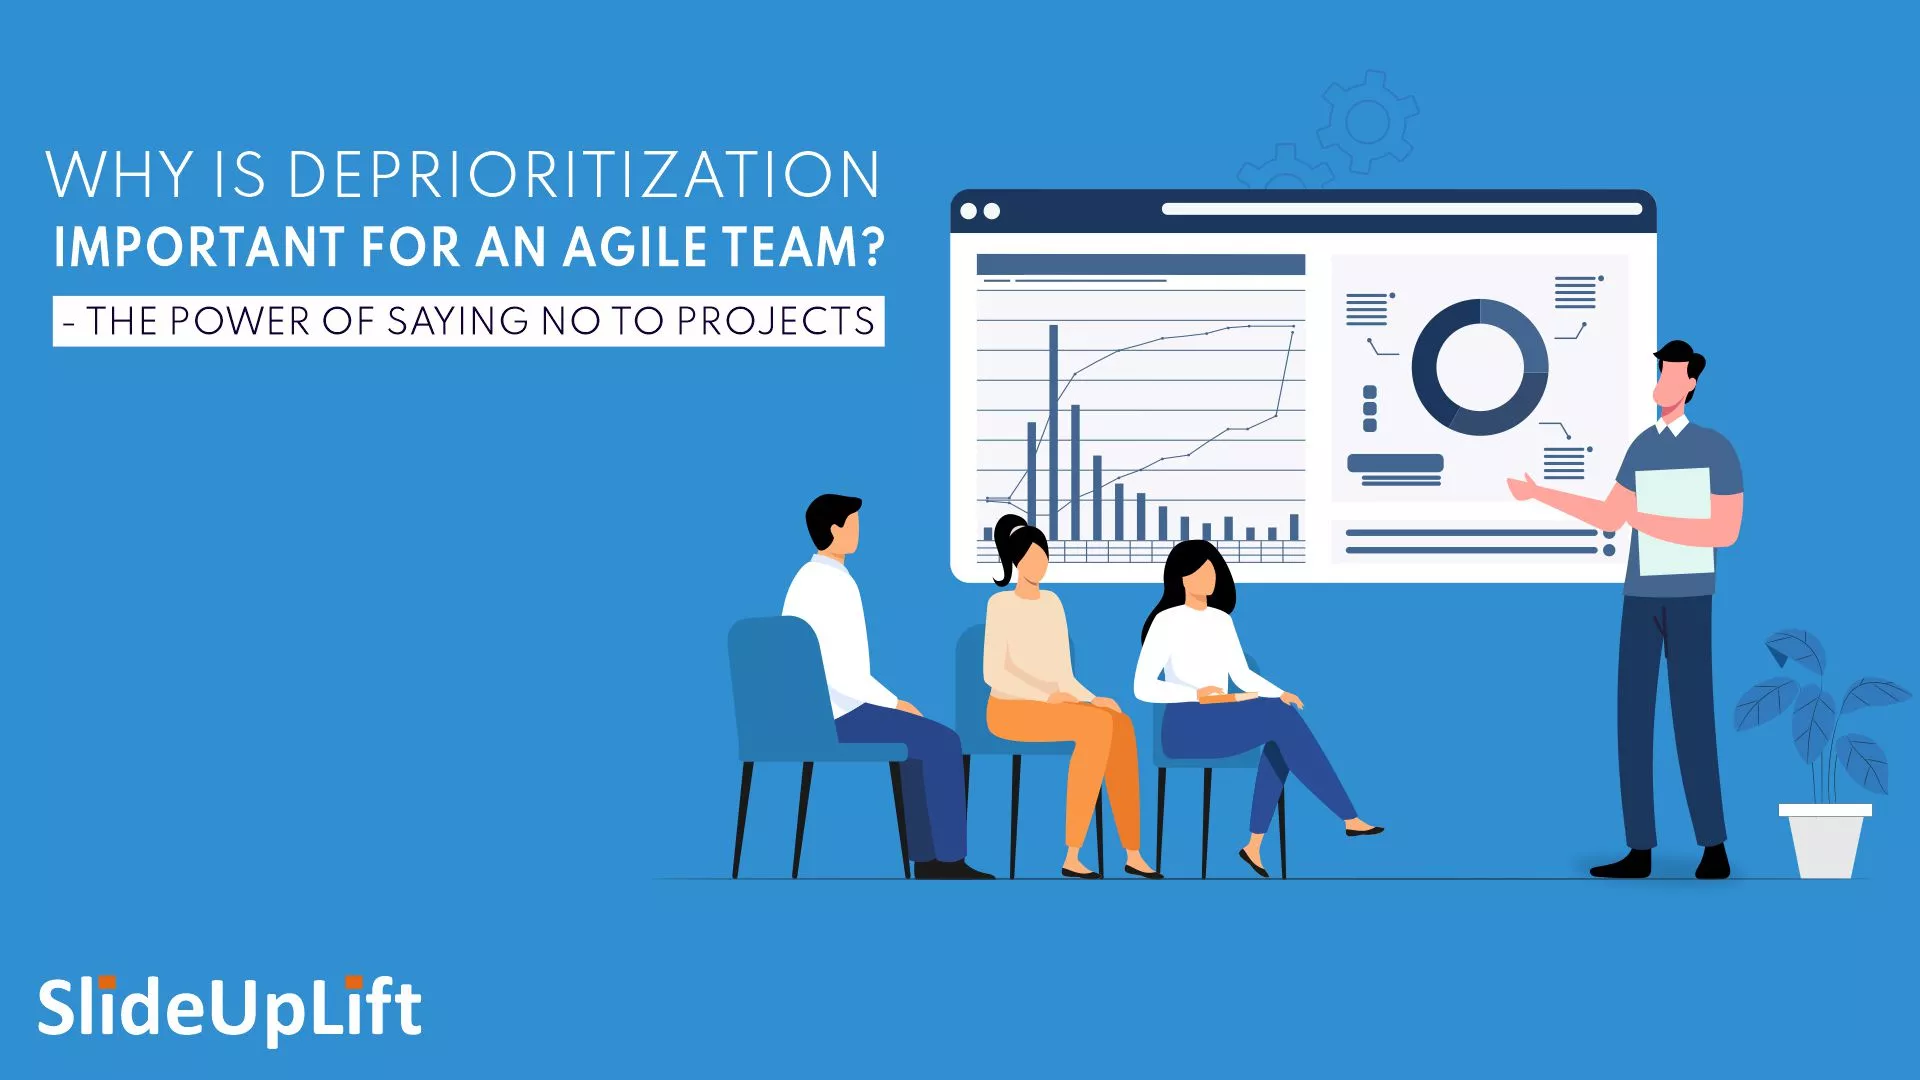 Why Is Deprioritization Important For An Agile Team? – The Power Of Saying No To Projects